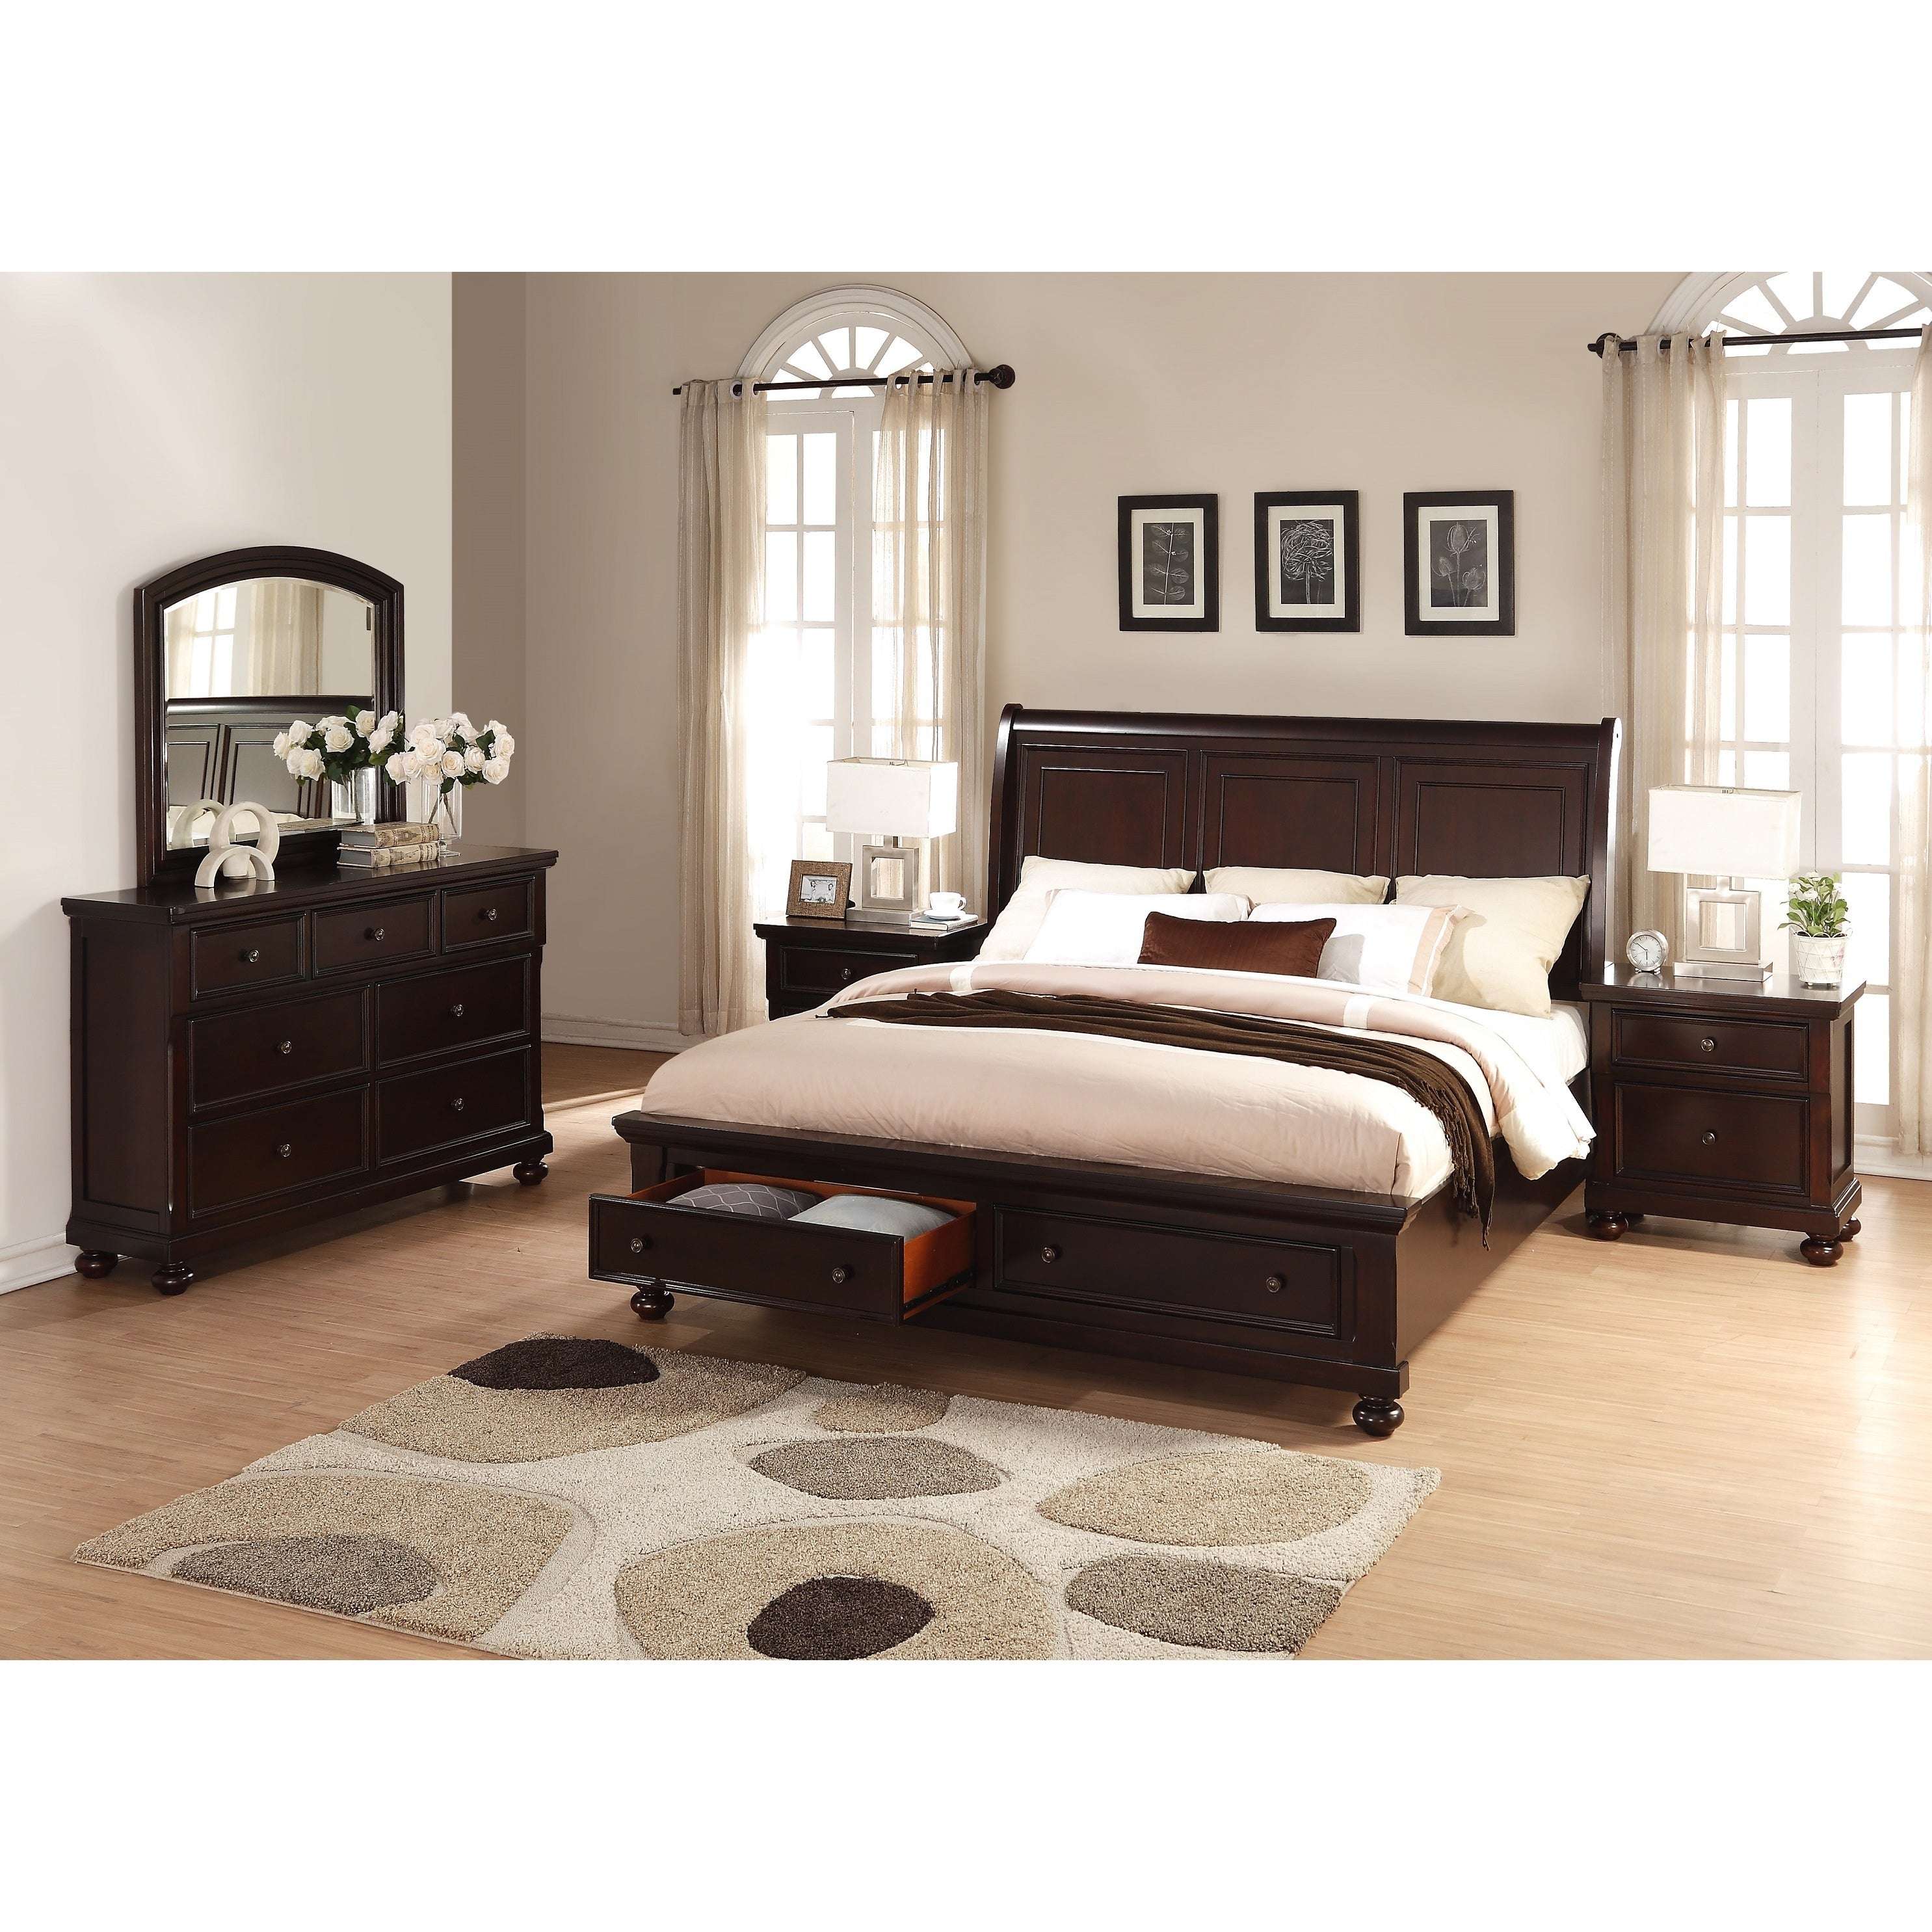 Brishland Rustic Cherry King Size Storage Bedroom Set with regard to dimensions 2971 X 2971